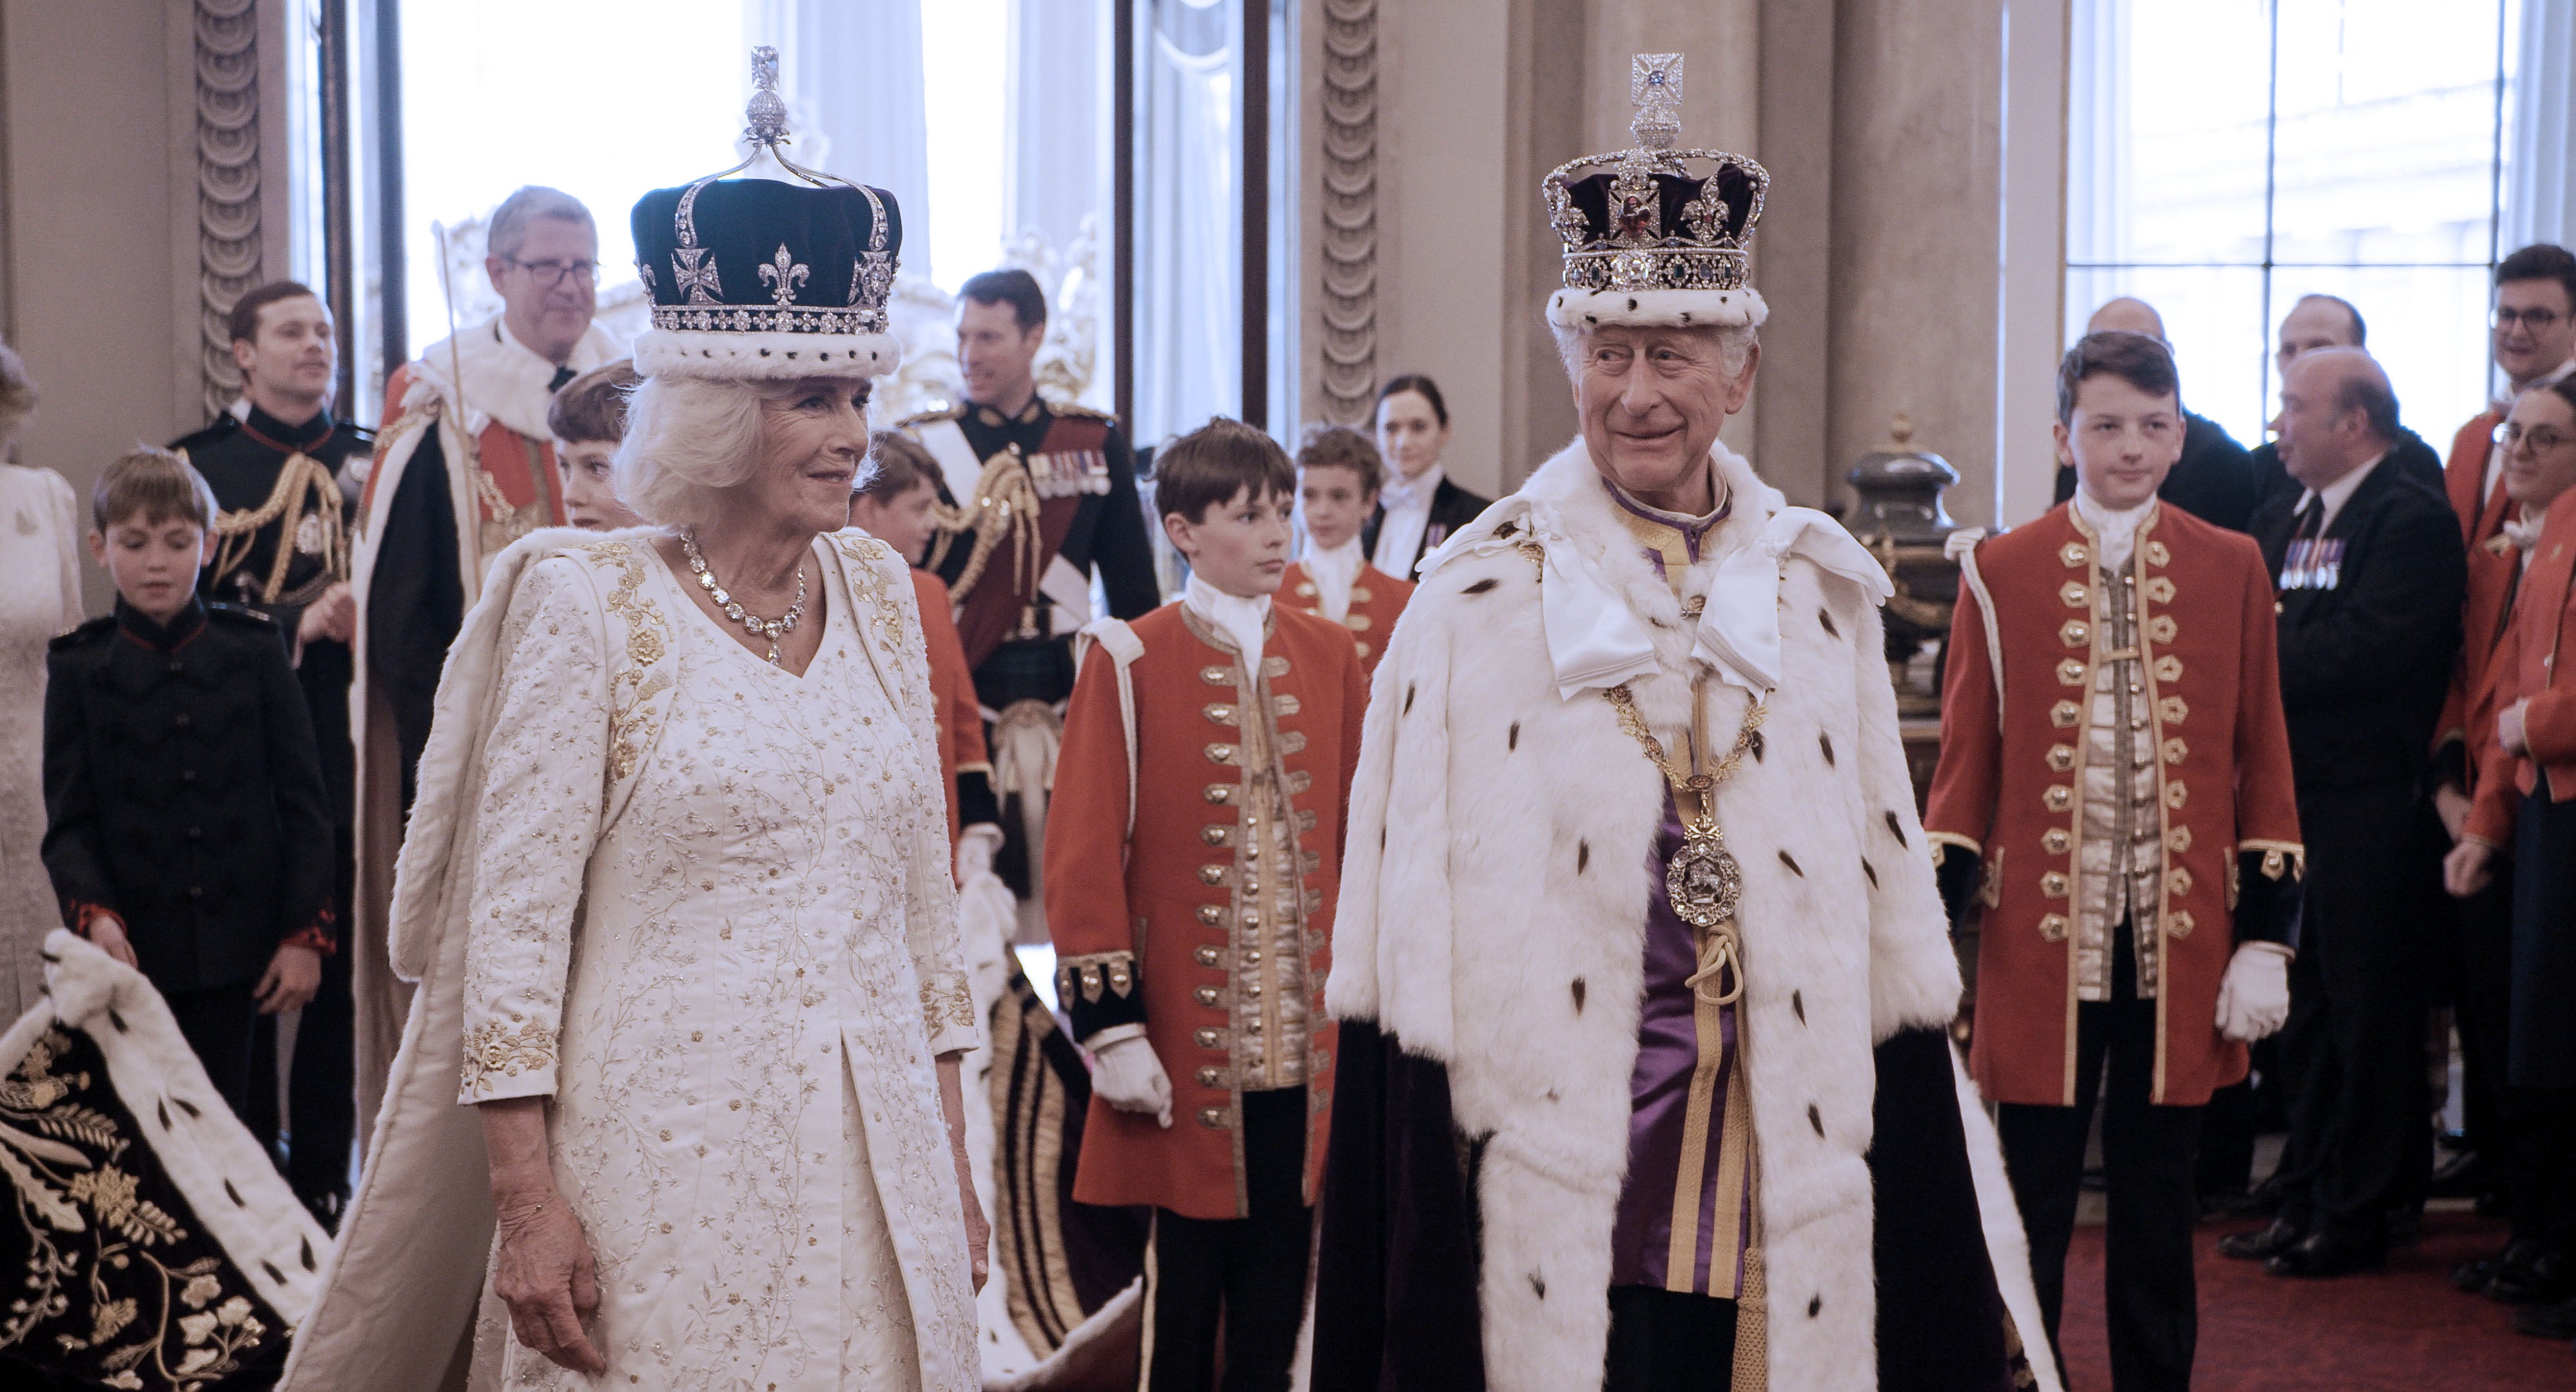 King Charles III and Queen Camilla in coronation gowns and crowns at Buckingham Palace on the big day